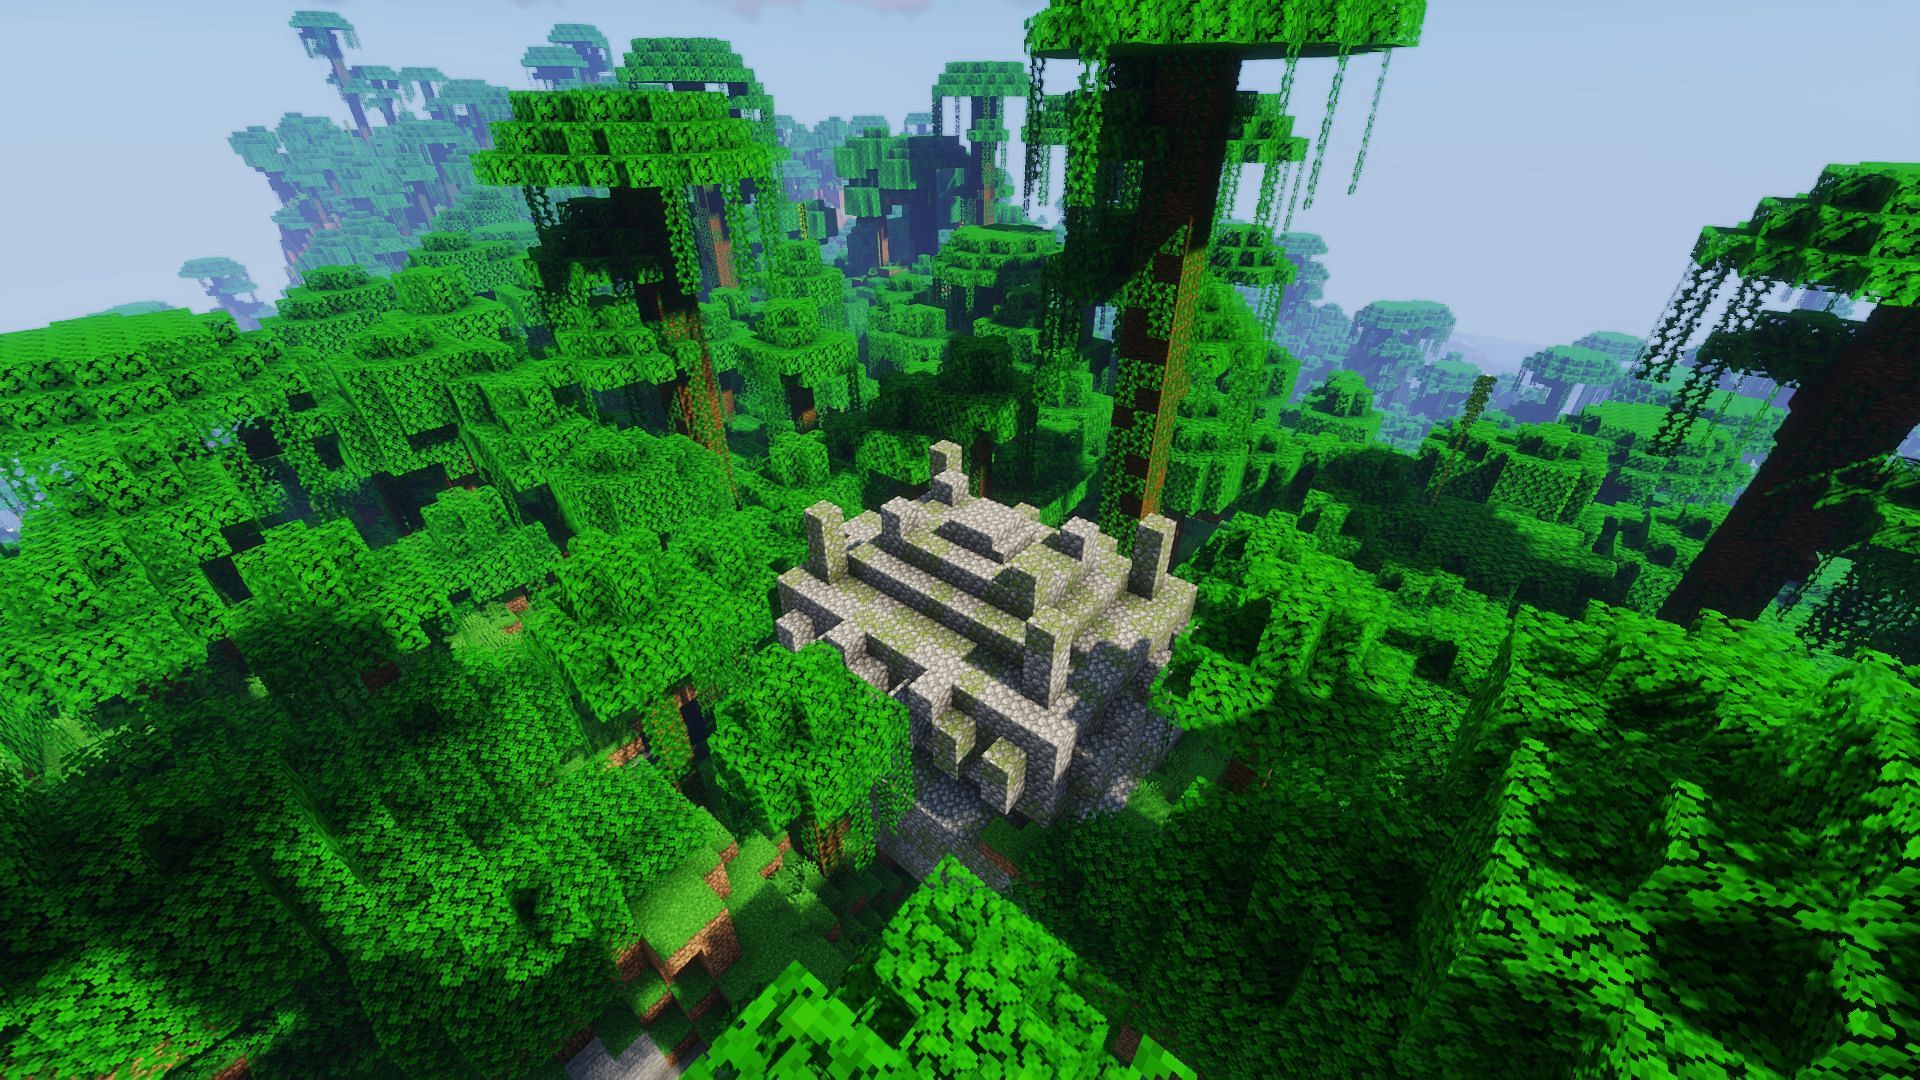 One of the jungle temples found in the seed (Image via Minecraft)